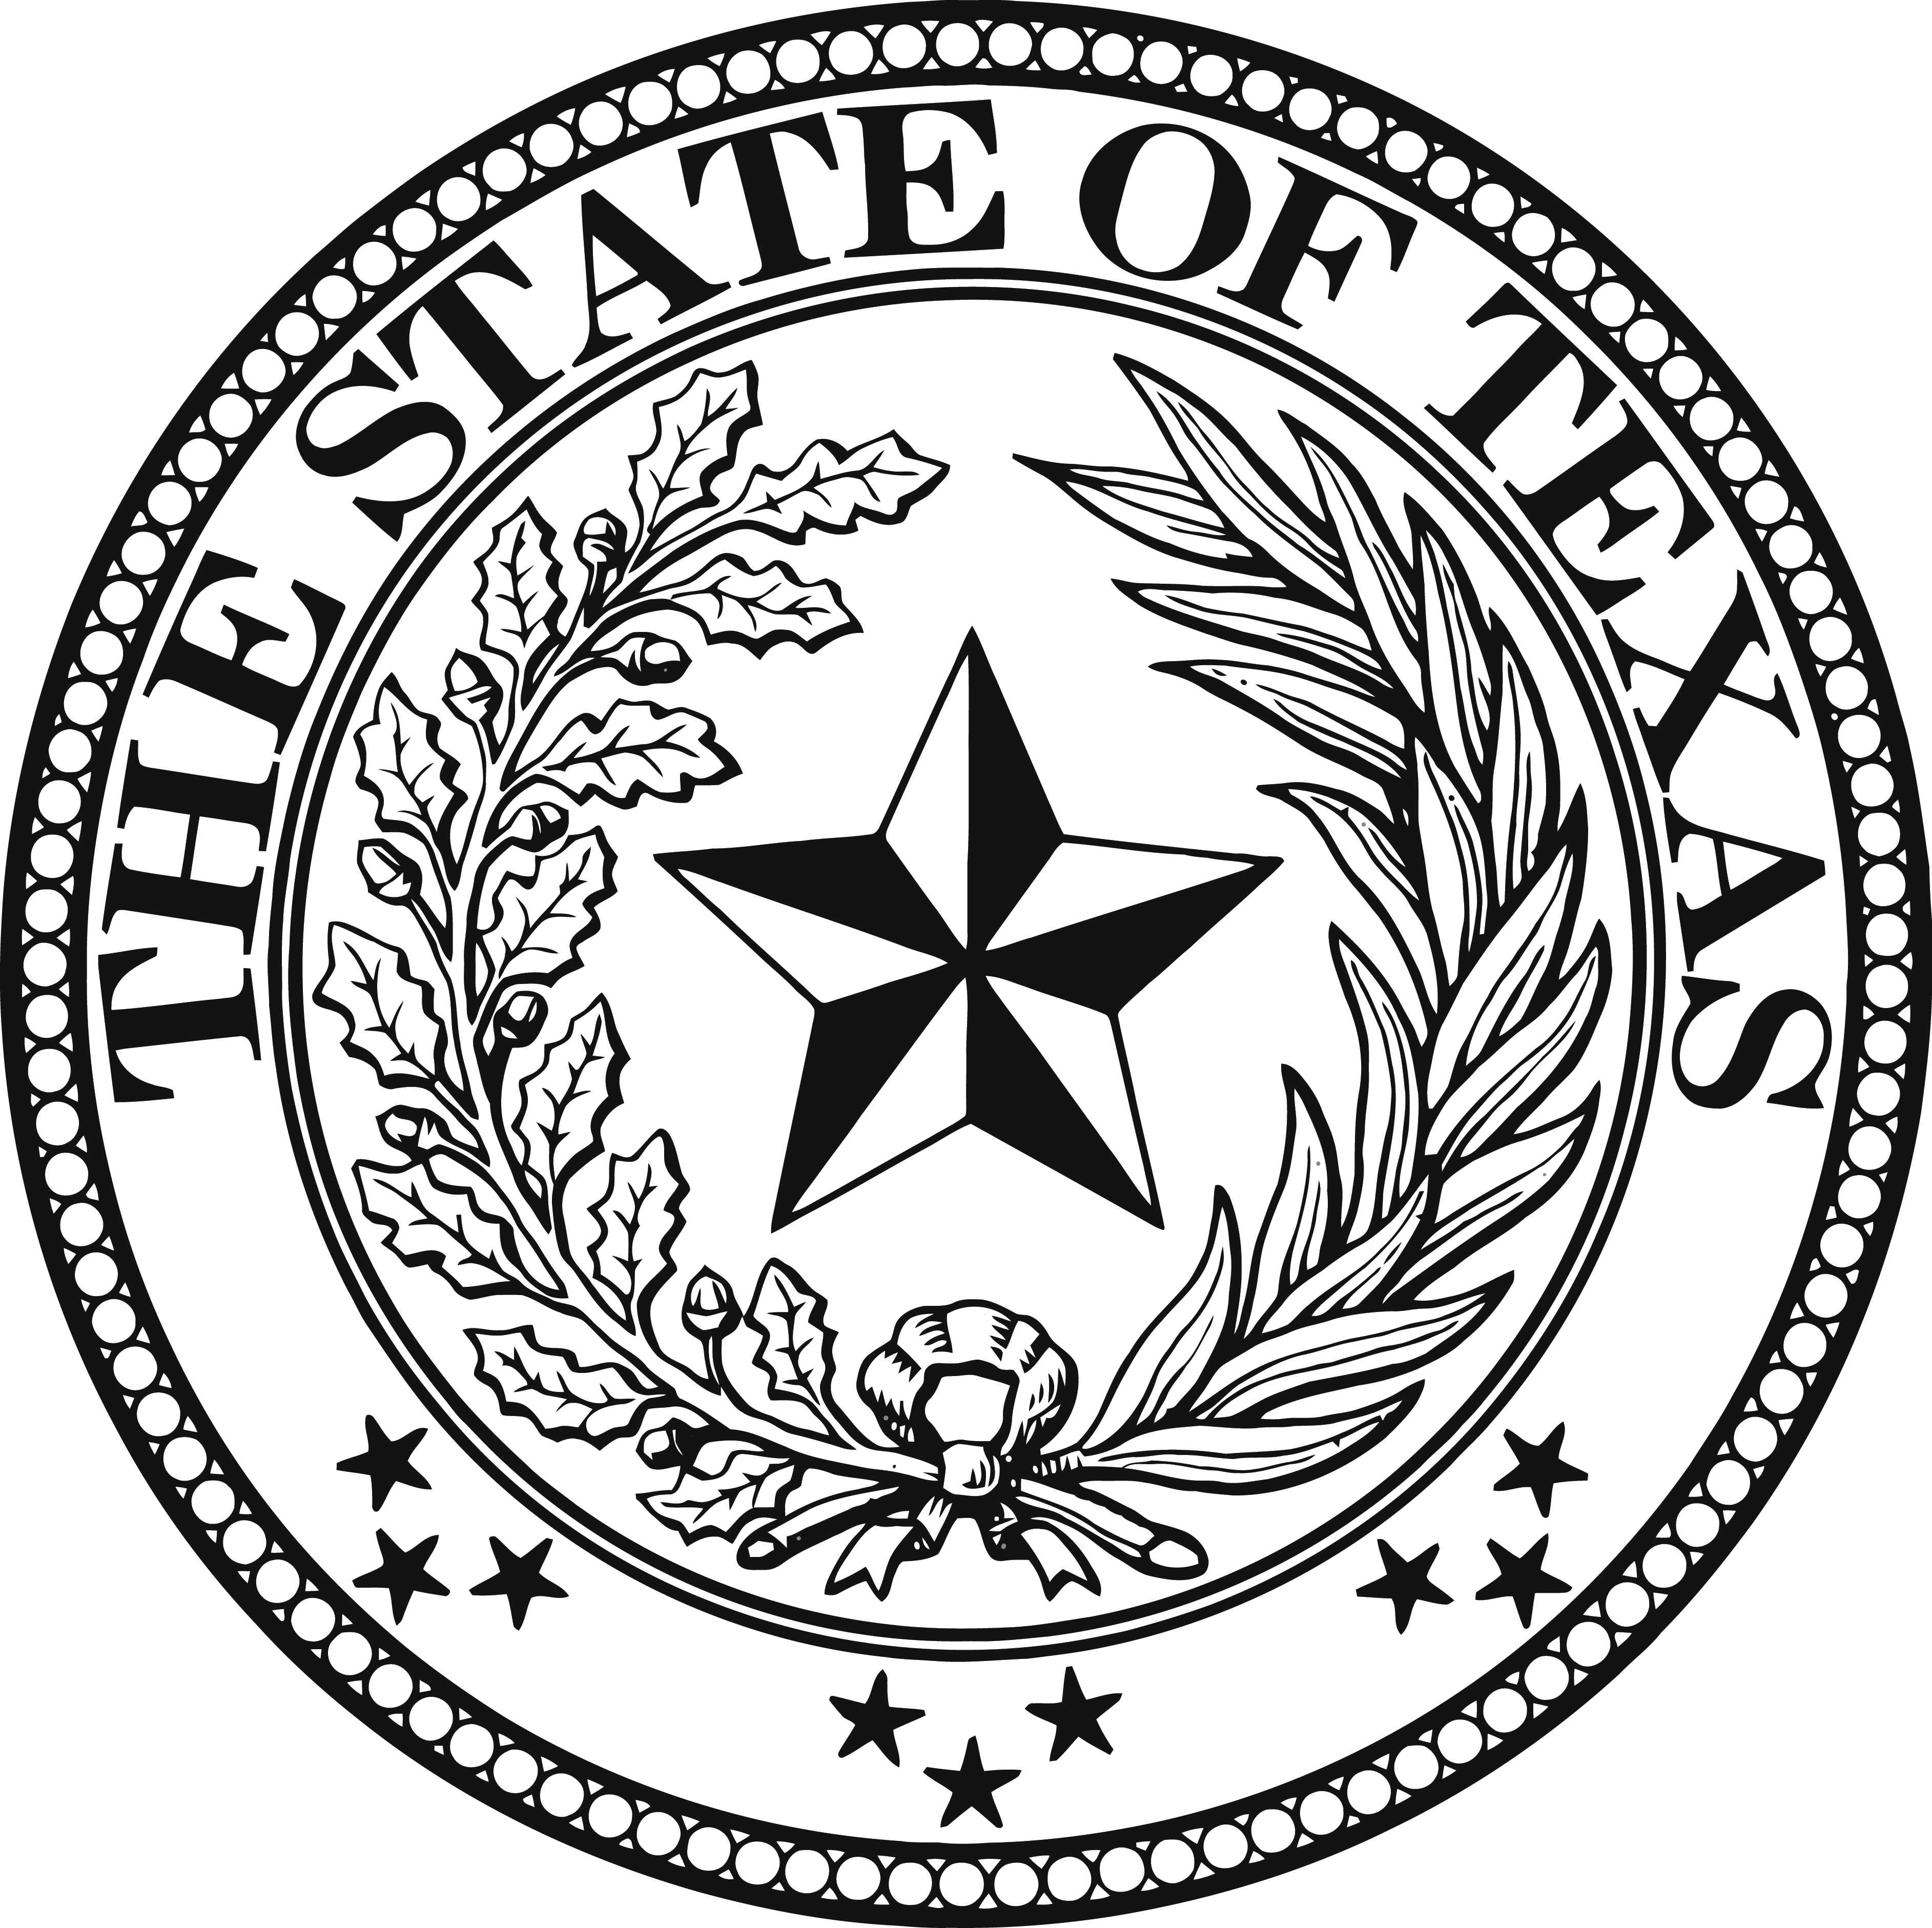 The State of Texas Logo